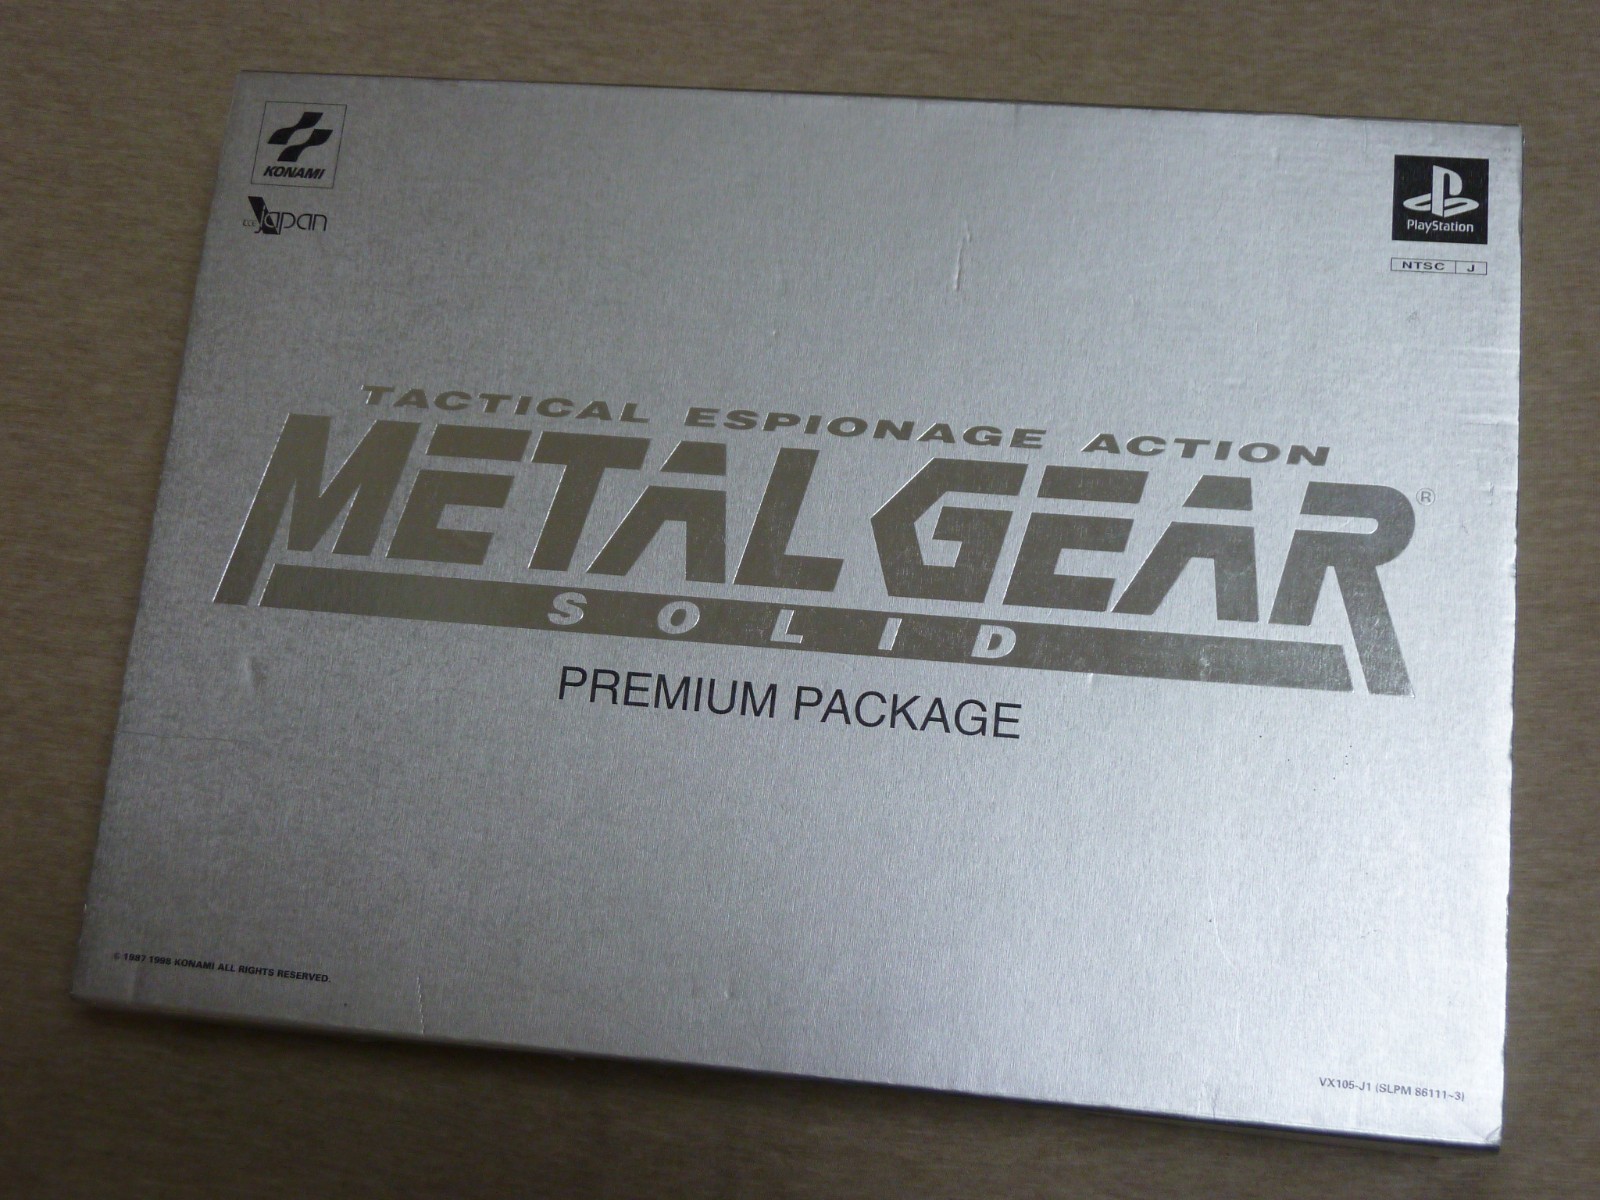 Sony-Play-Station-METAL-GEAR-SOLID-Premium-Package-Limited-Edition-PS-Japan-USED